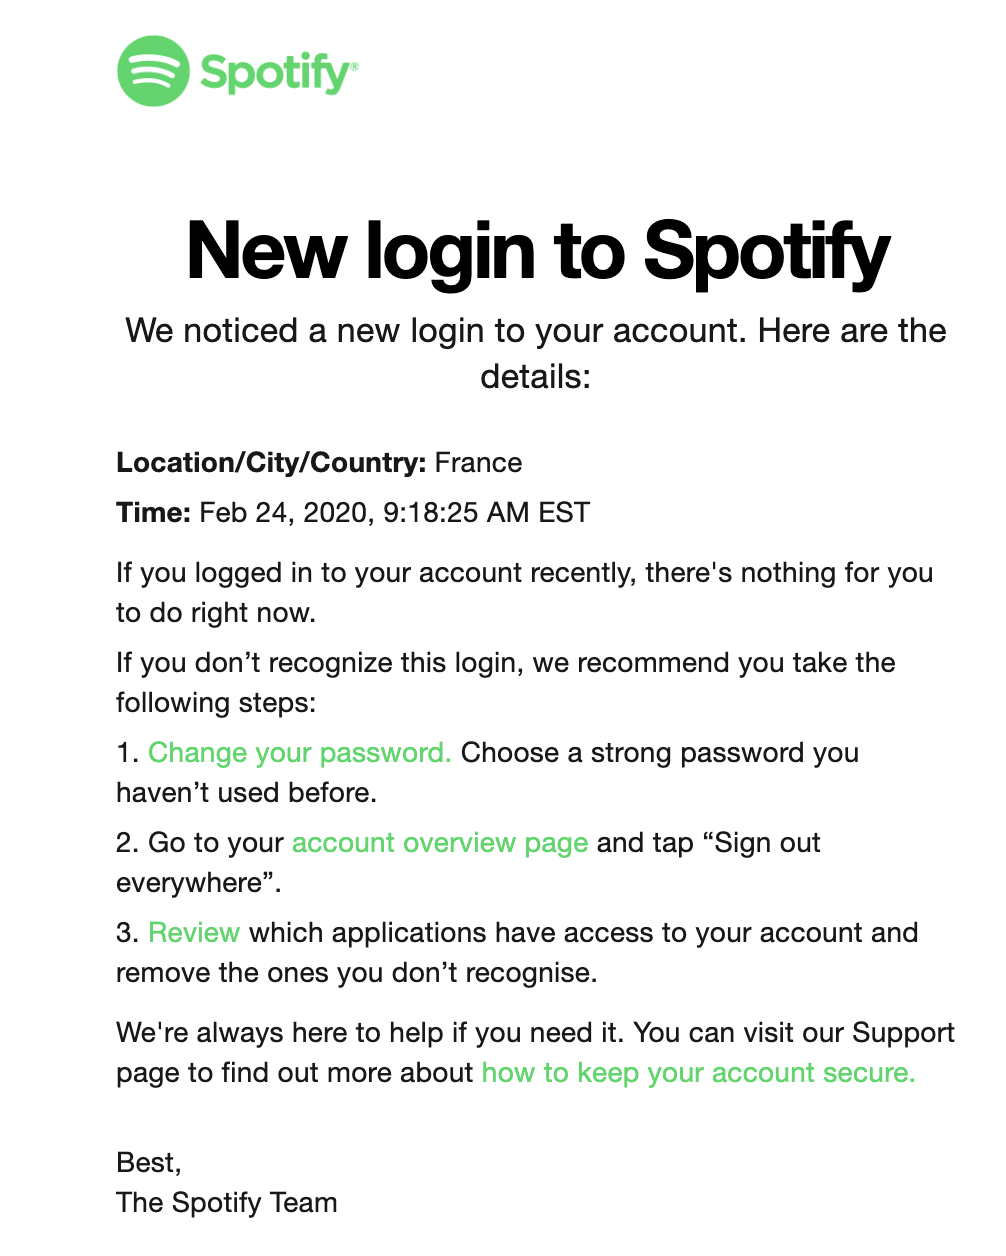 Spotify research email